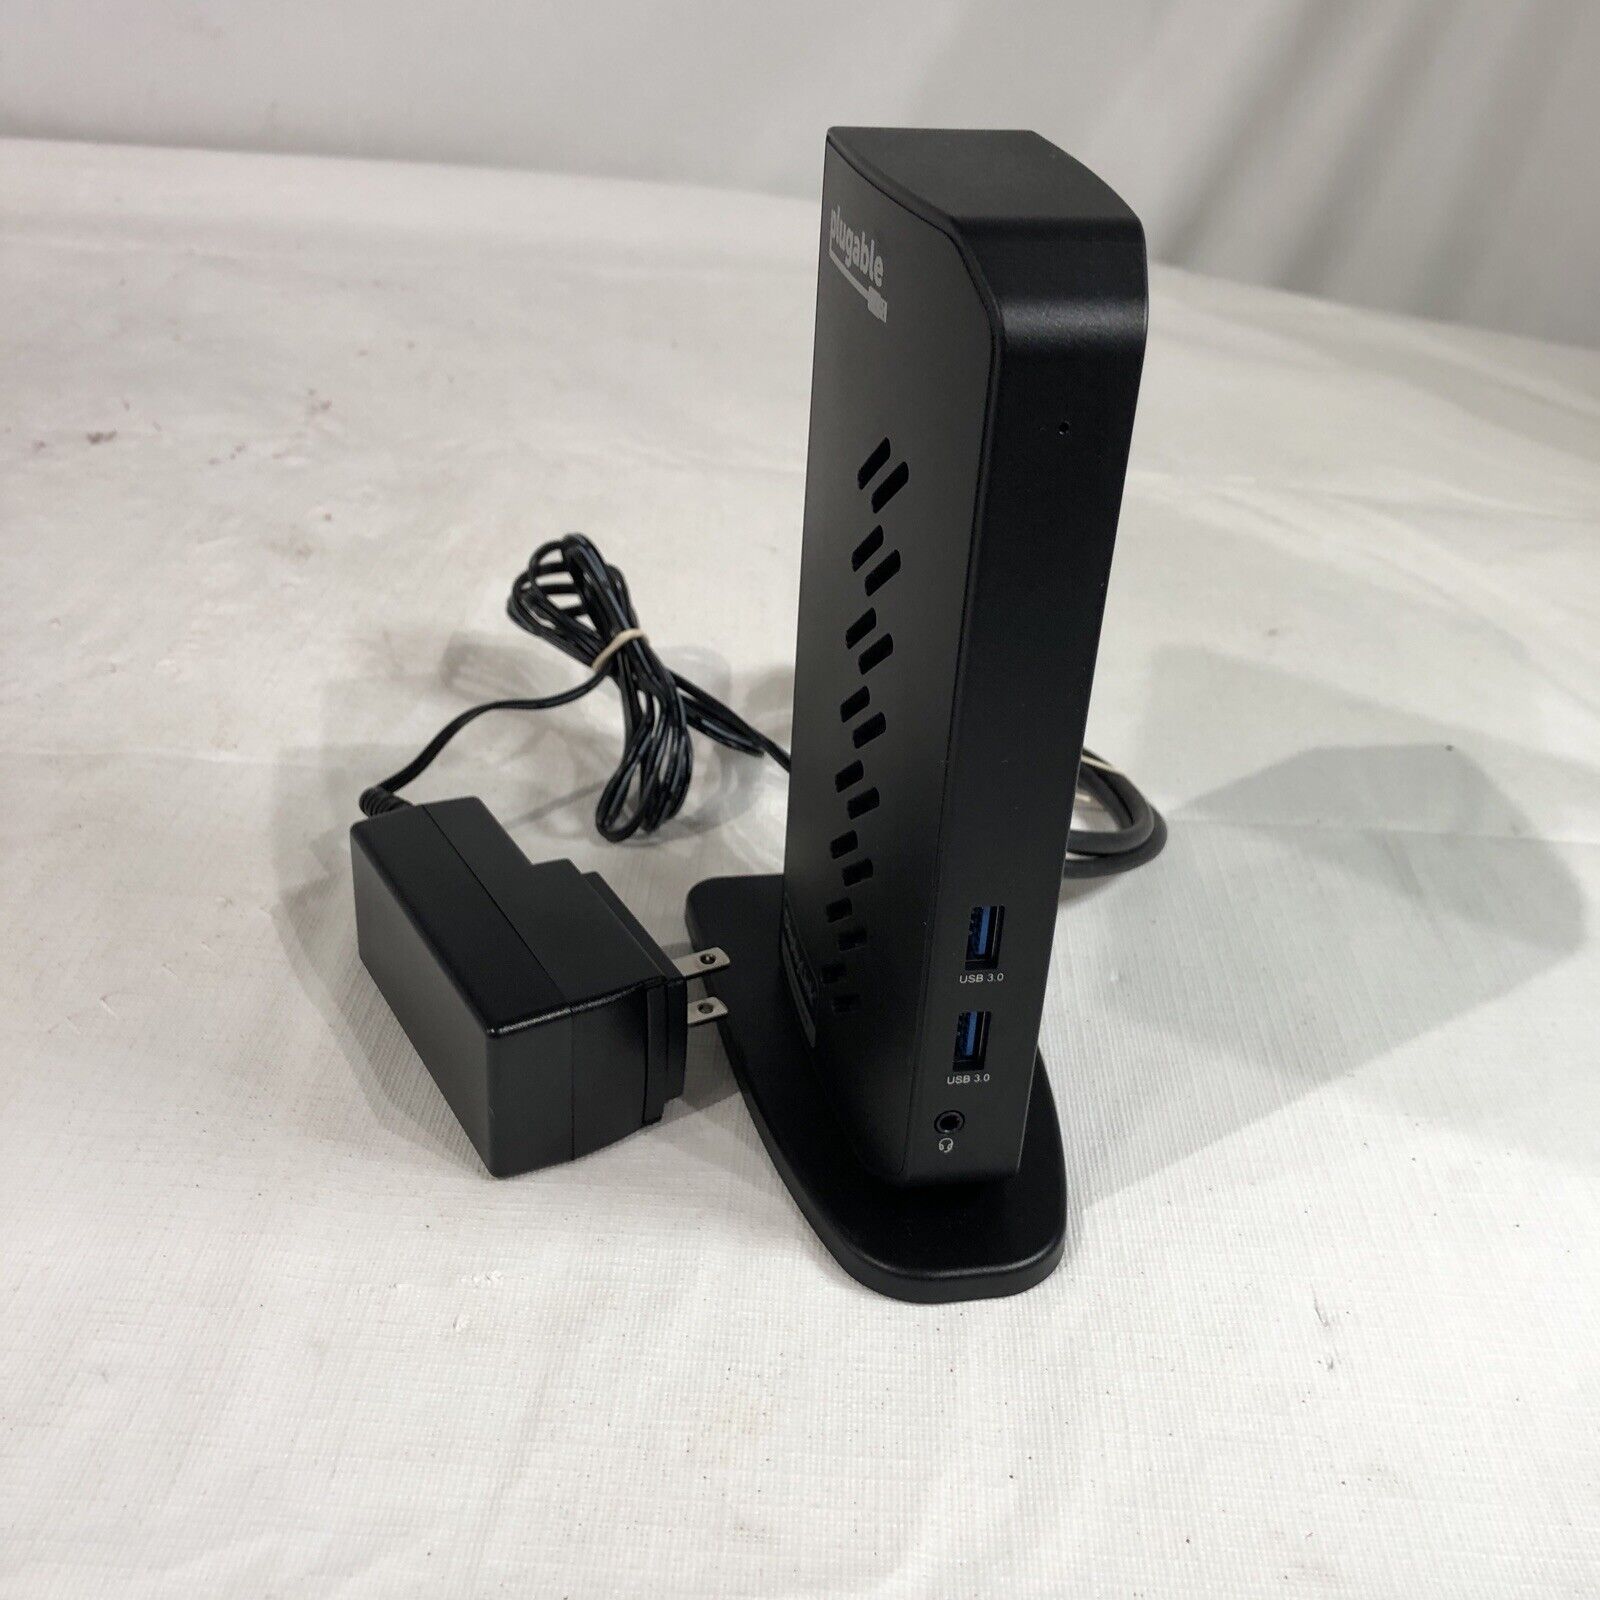 Plugable Docking Station UD-6950Z With Power.